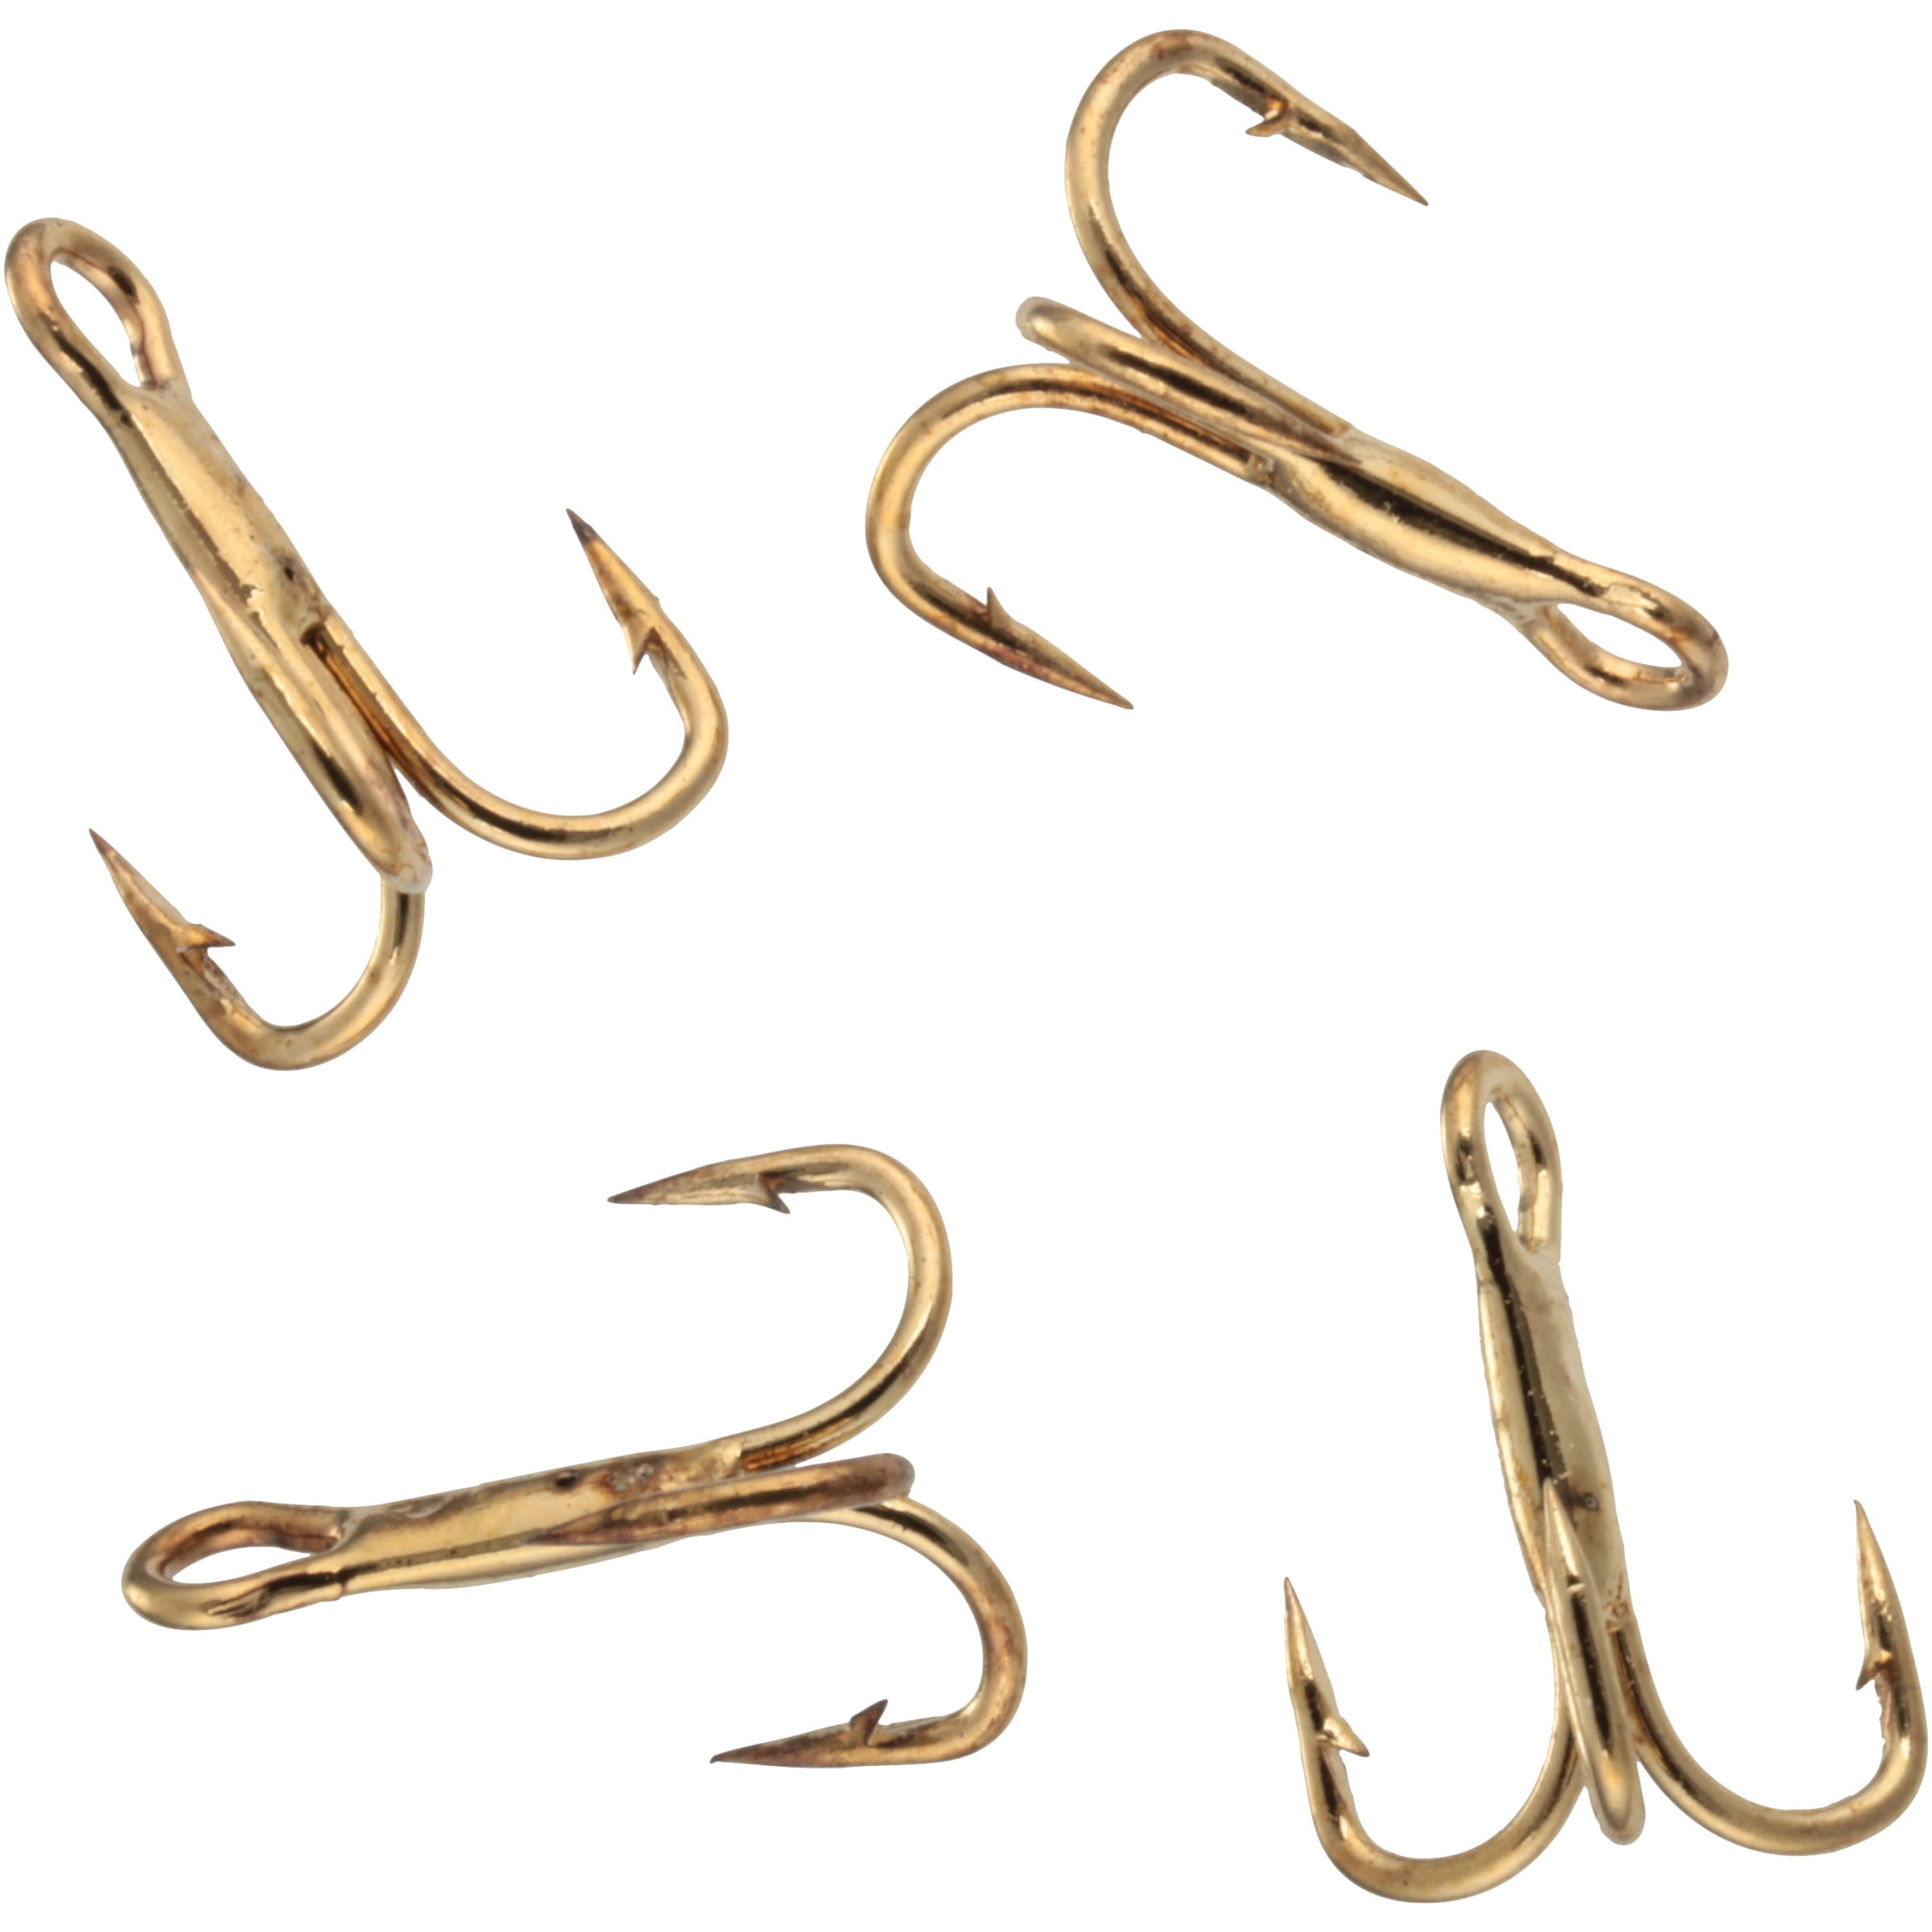 South Bend GT-16 Gold Treble Fishing Hooks, Size 16, 4-Pack